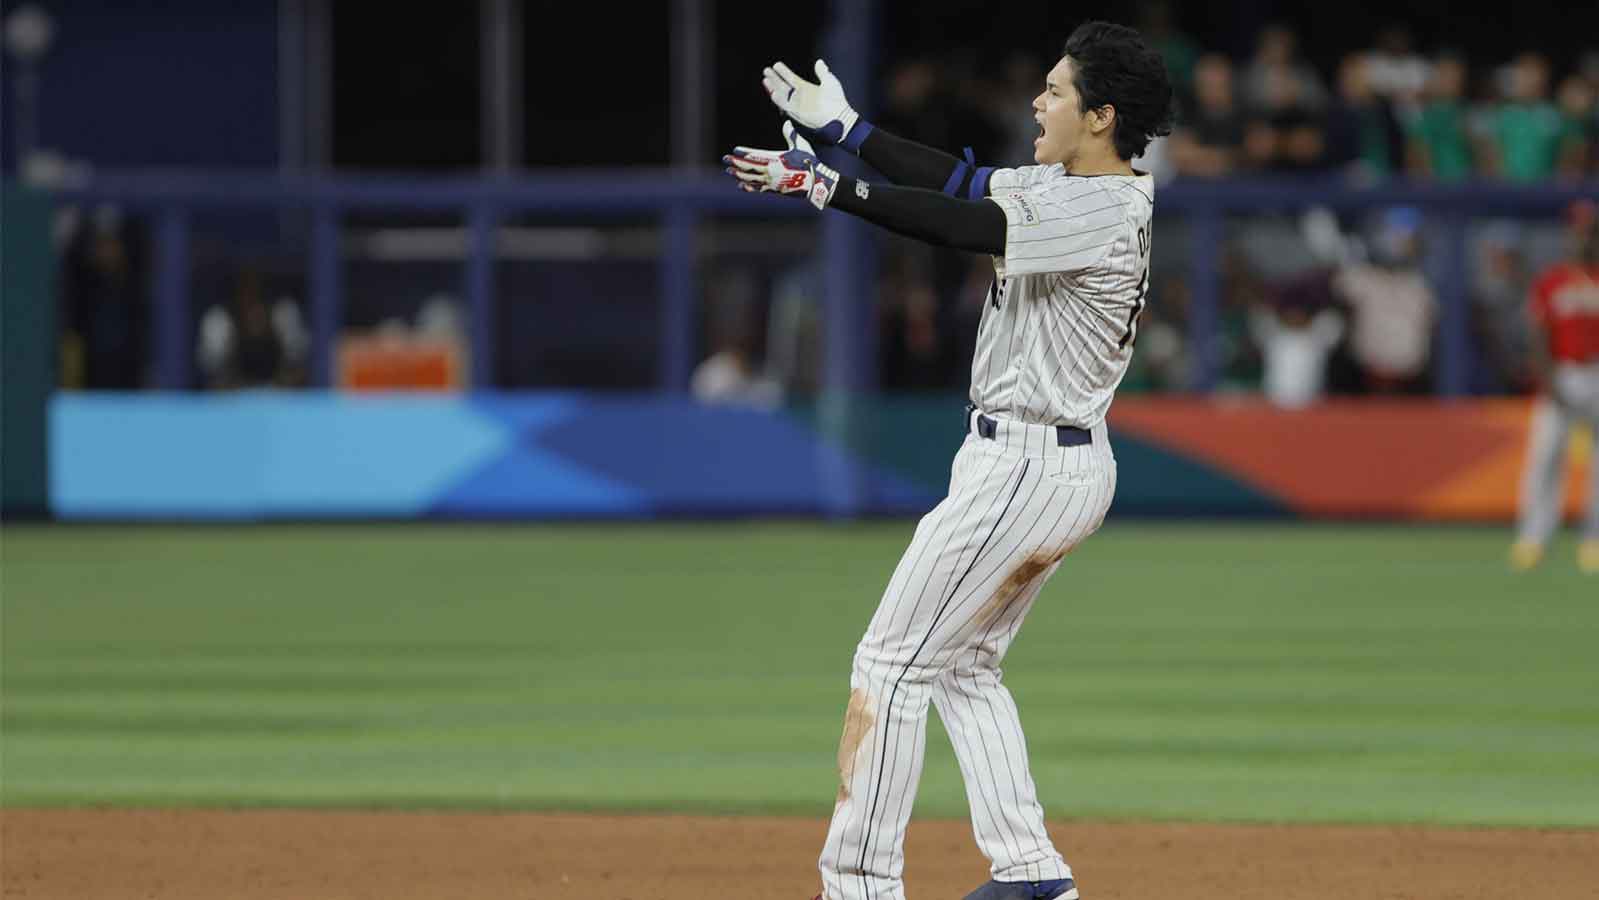 Ohtani ready to pitch vs Trout, USA in relief at WBC final